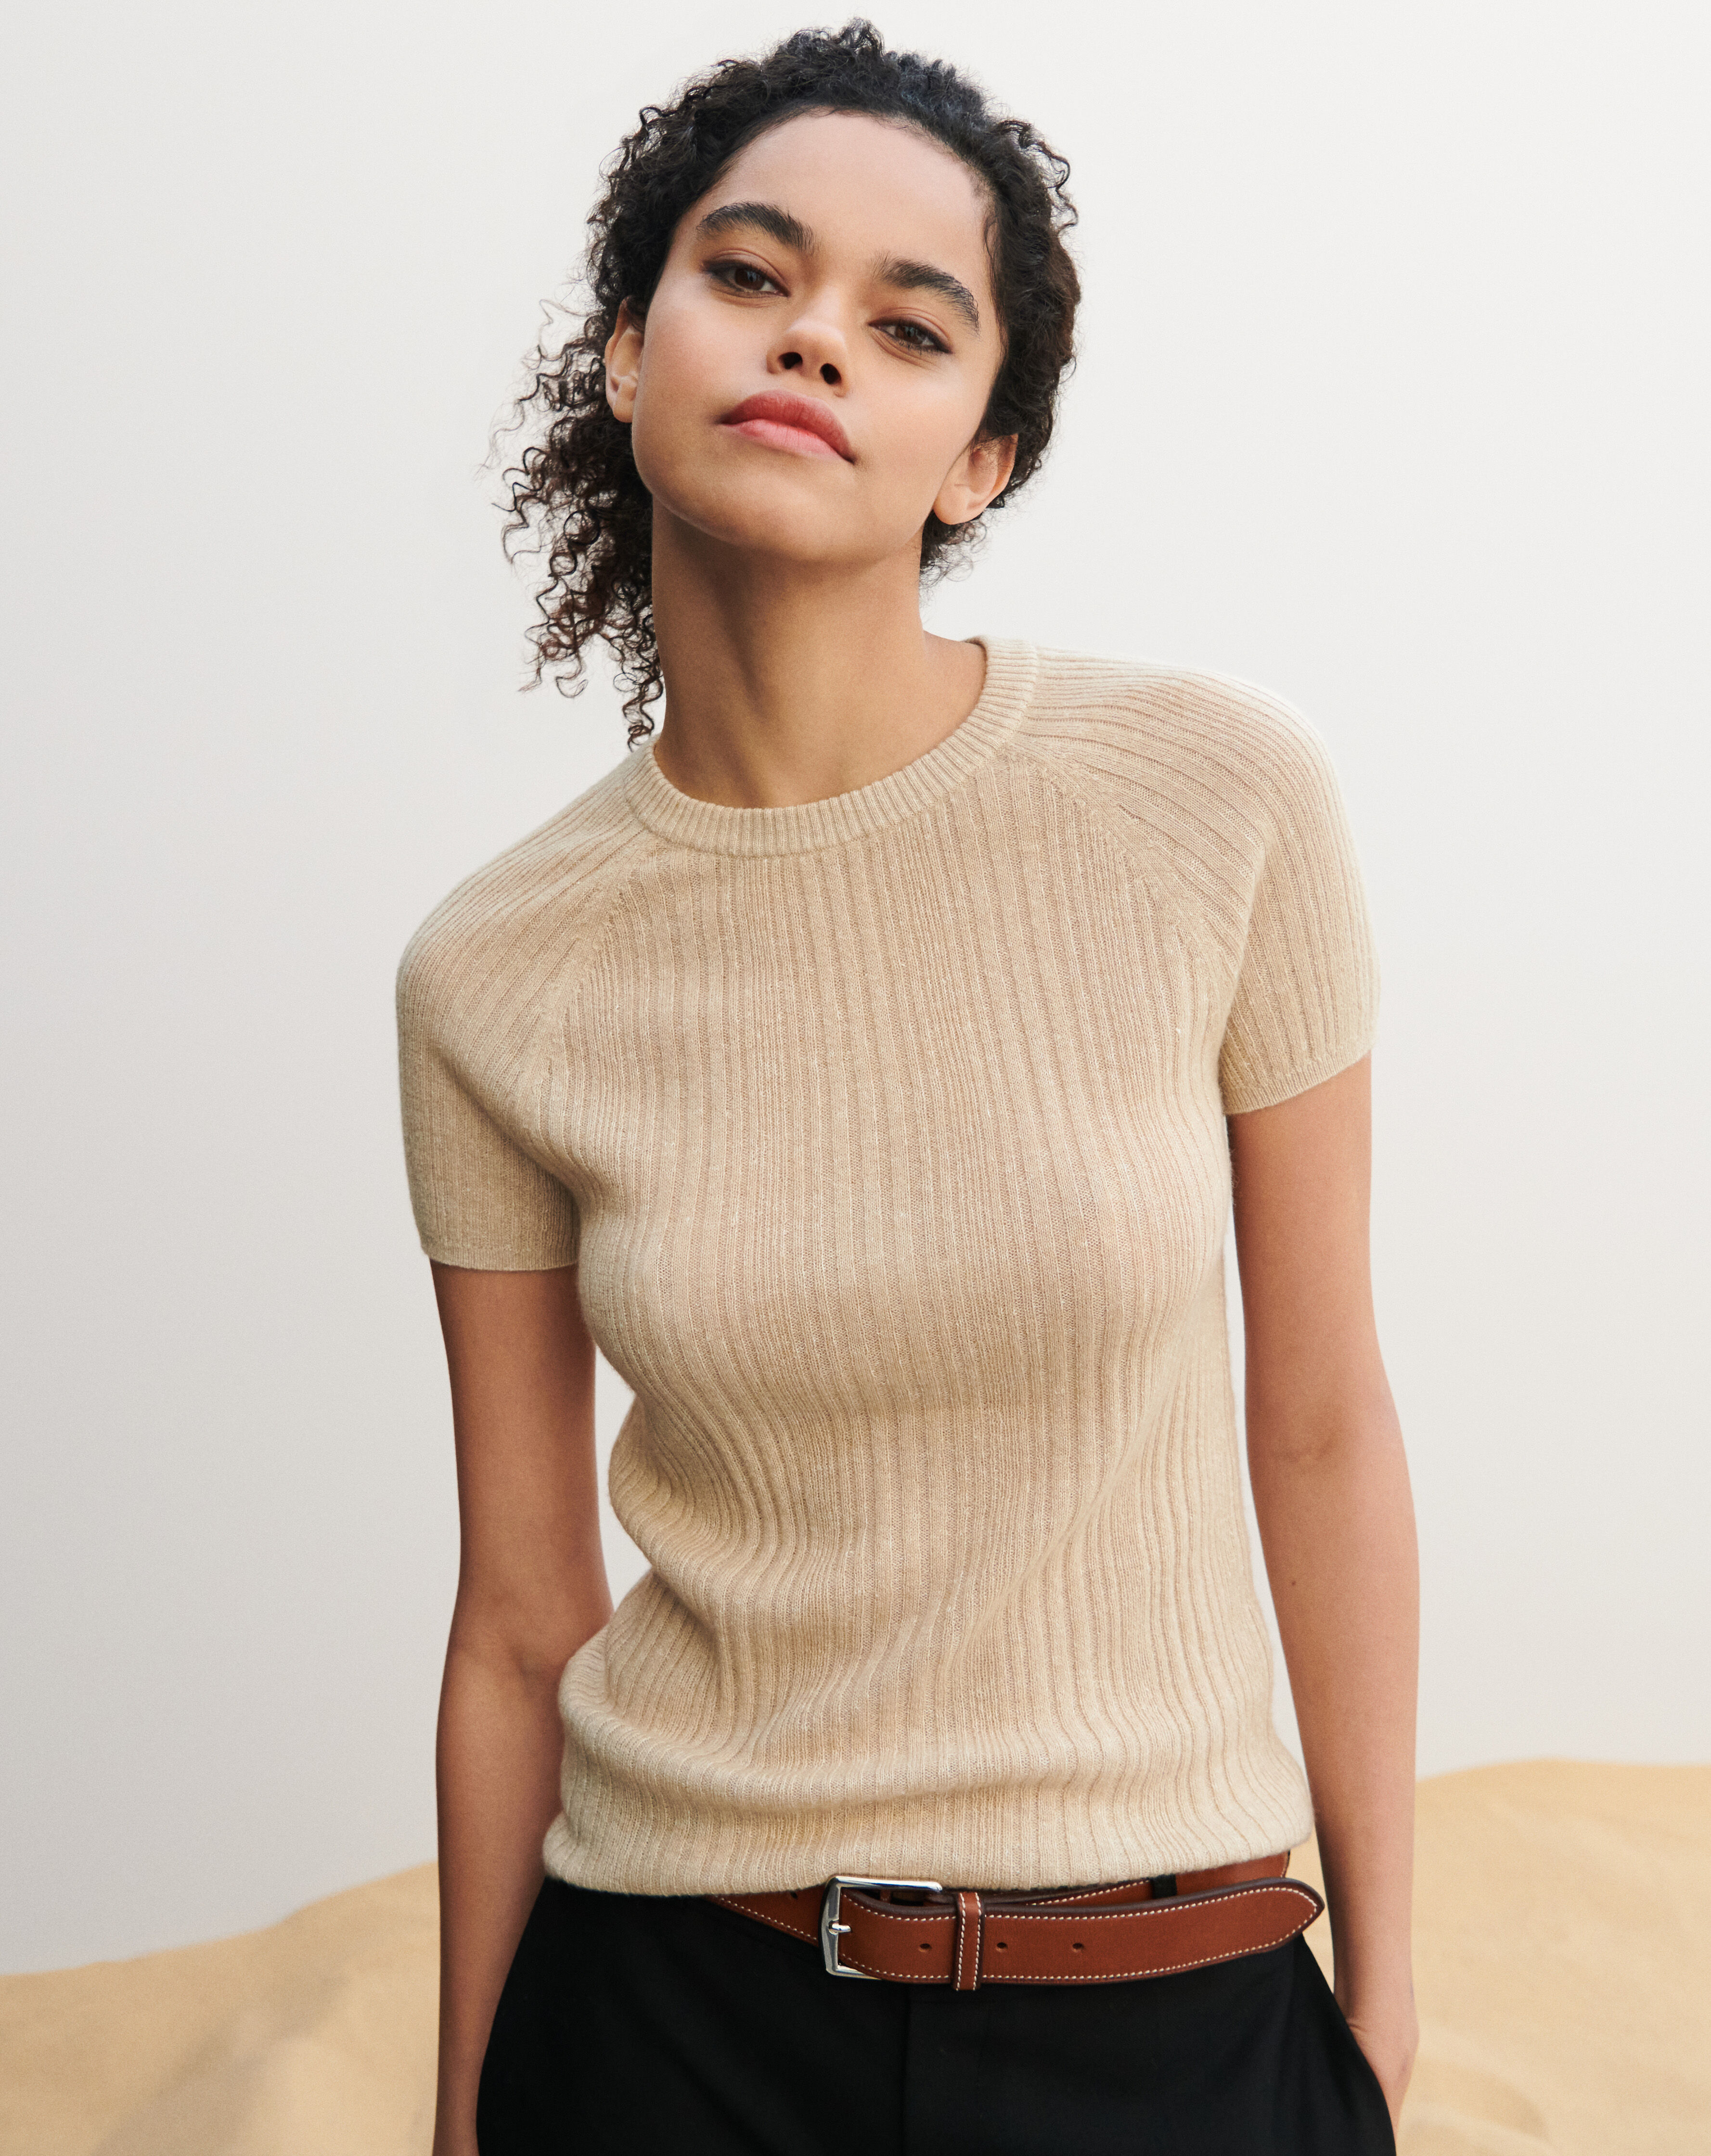 Cashmere Short sleeves pullovers for Women - Eric Bompard